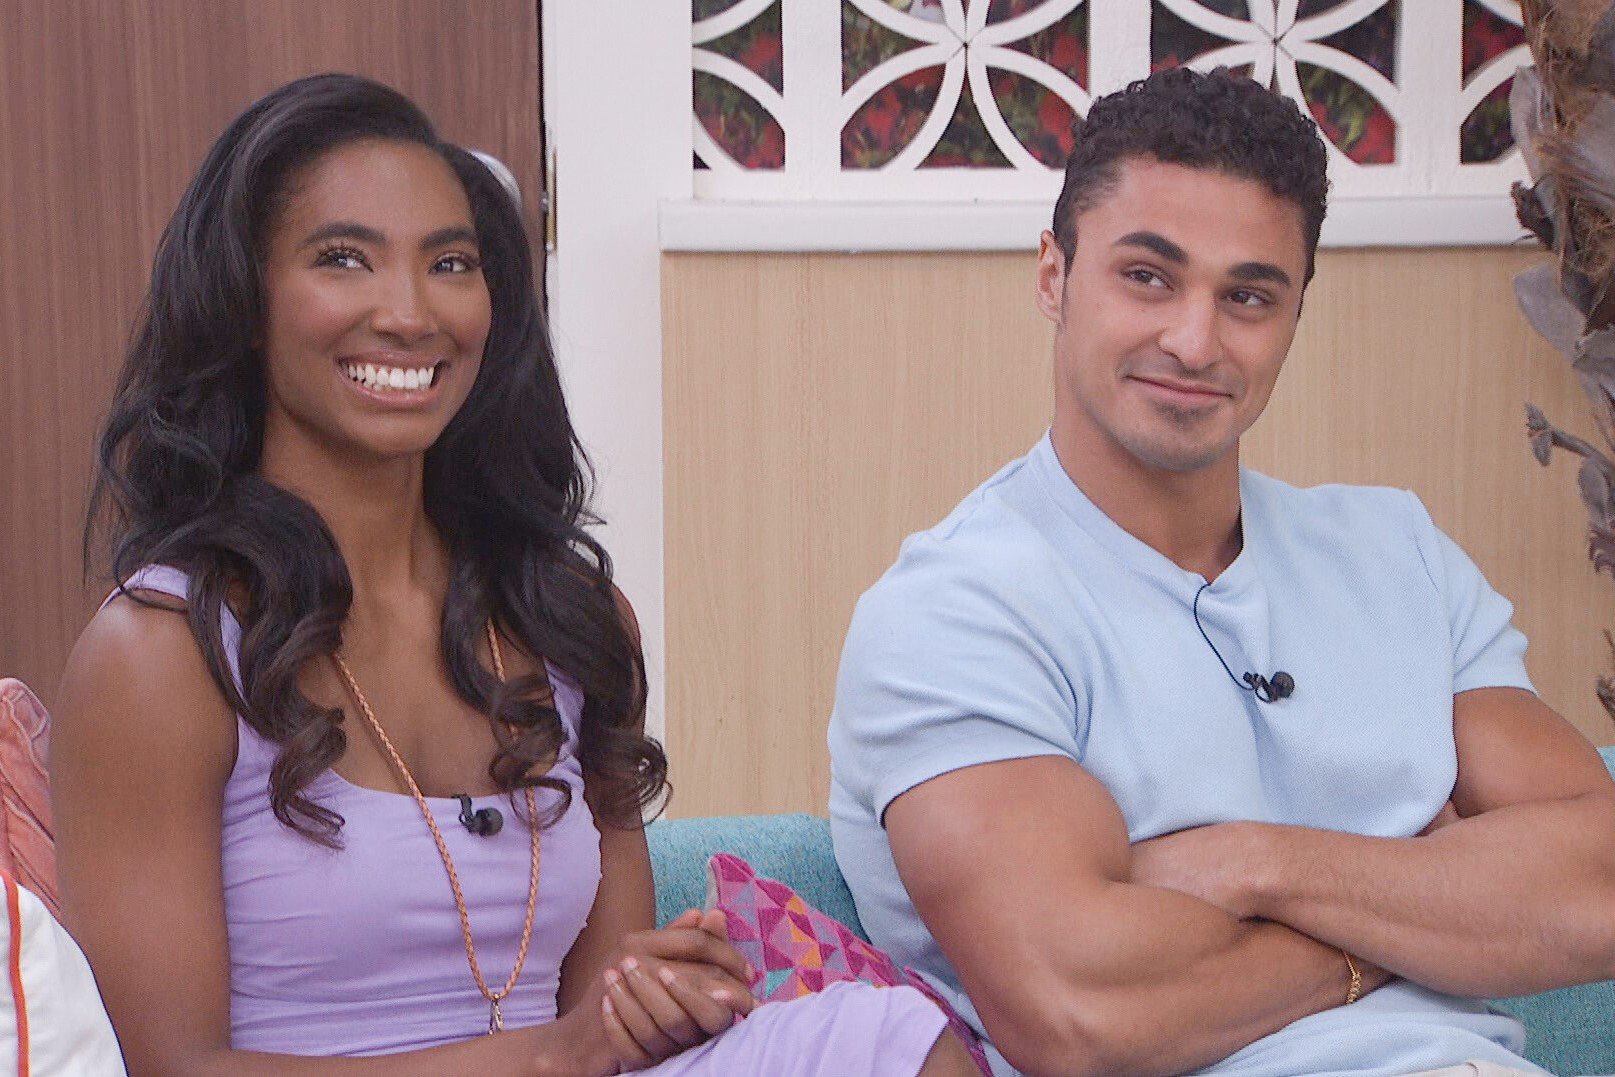 Taylor Hale and Joseph Abdin, who starred together in 'Big Brother 24' on CBS, sit next to each other on a couch. Taylor wears a light purple dress. Joseph wears a light blue shirt.